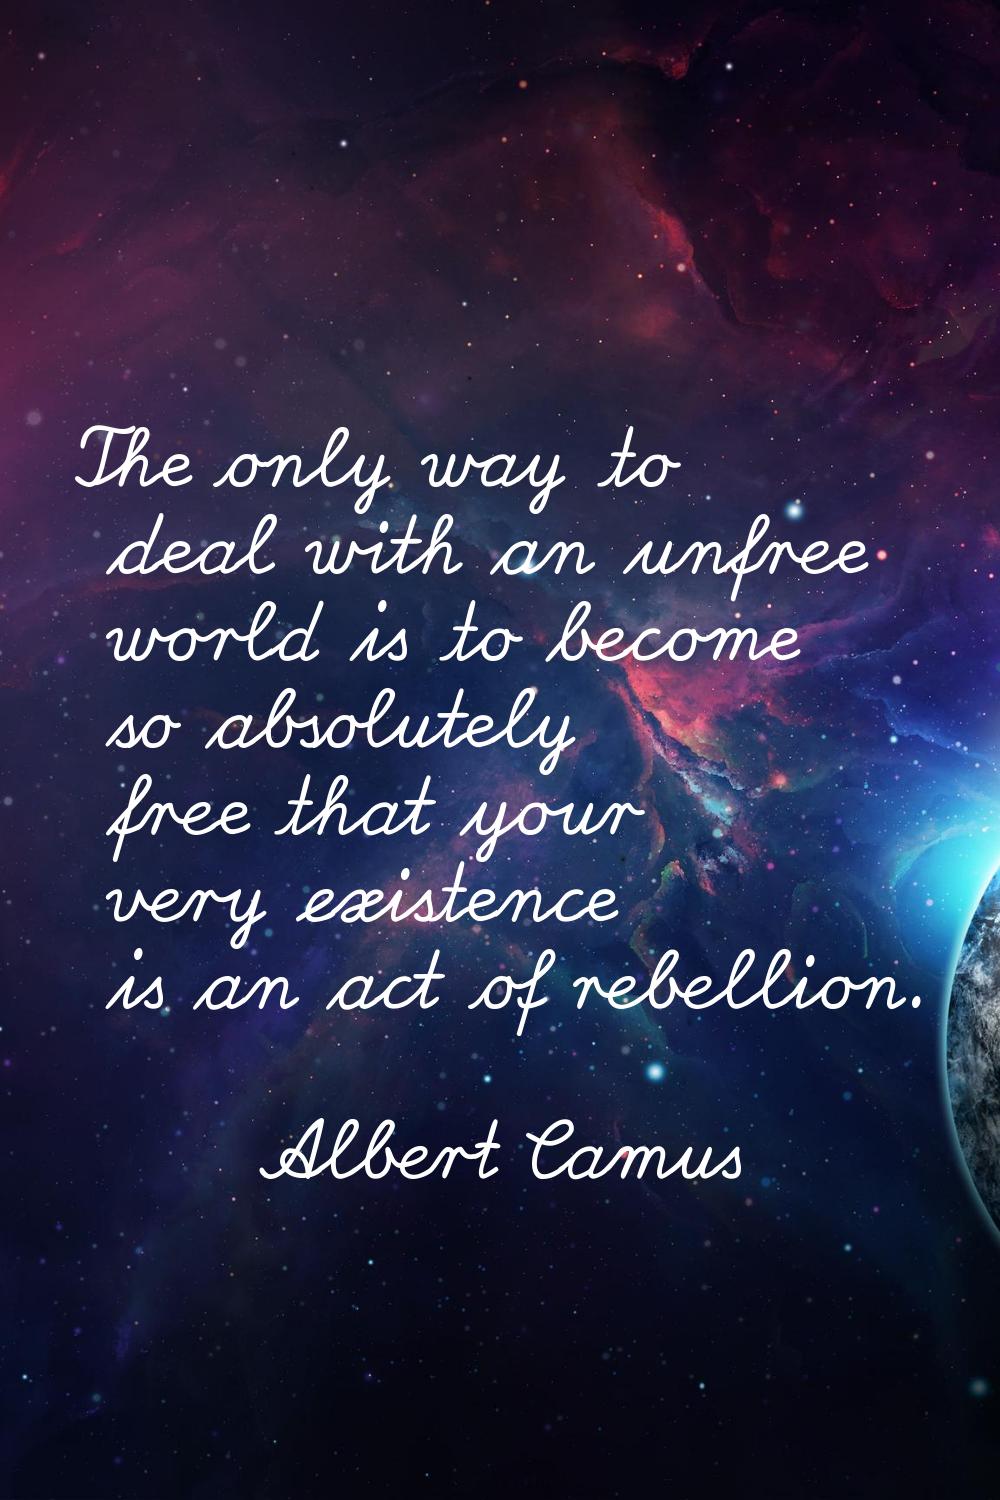 The only way to deal with an unfree world is to become so absolutely free that your very existence 